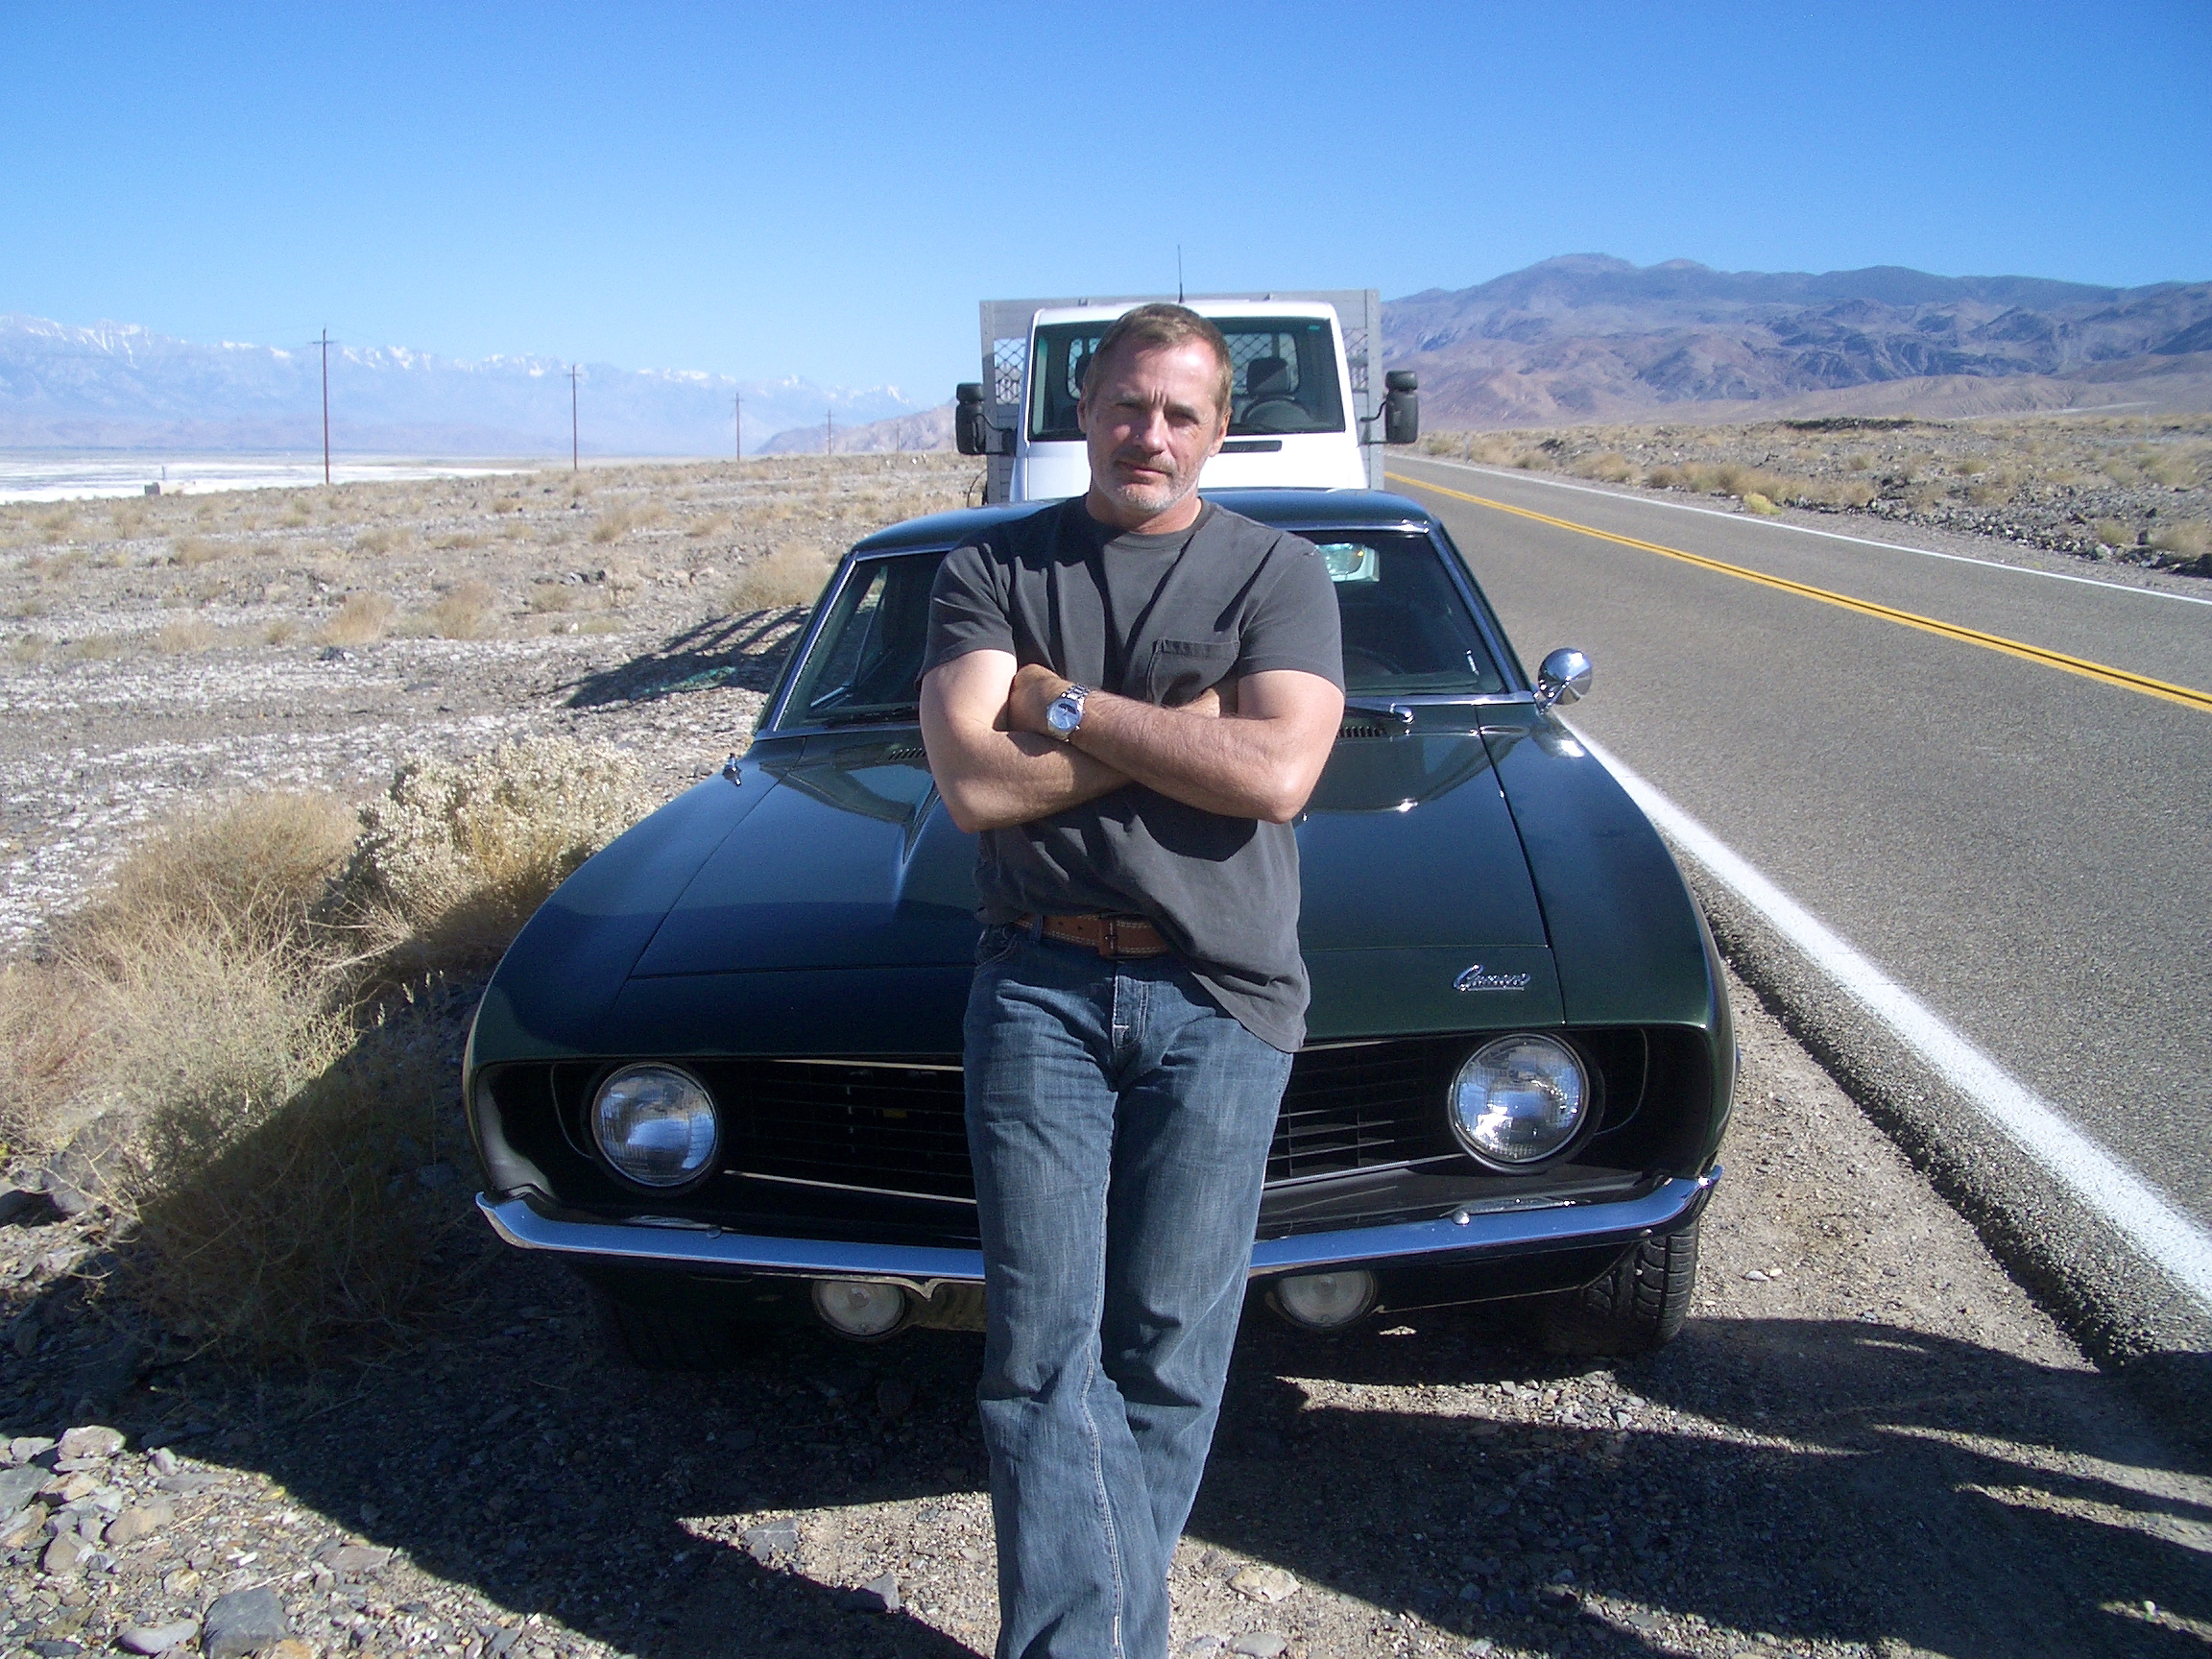 ON location in Lone Pine, CA.